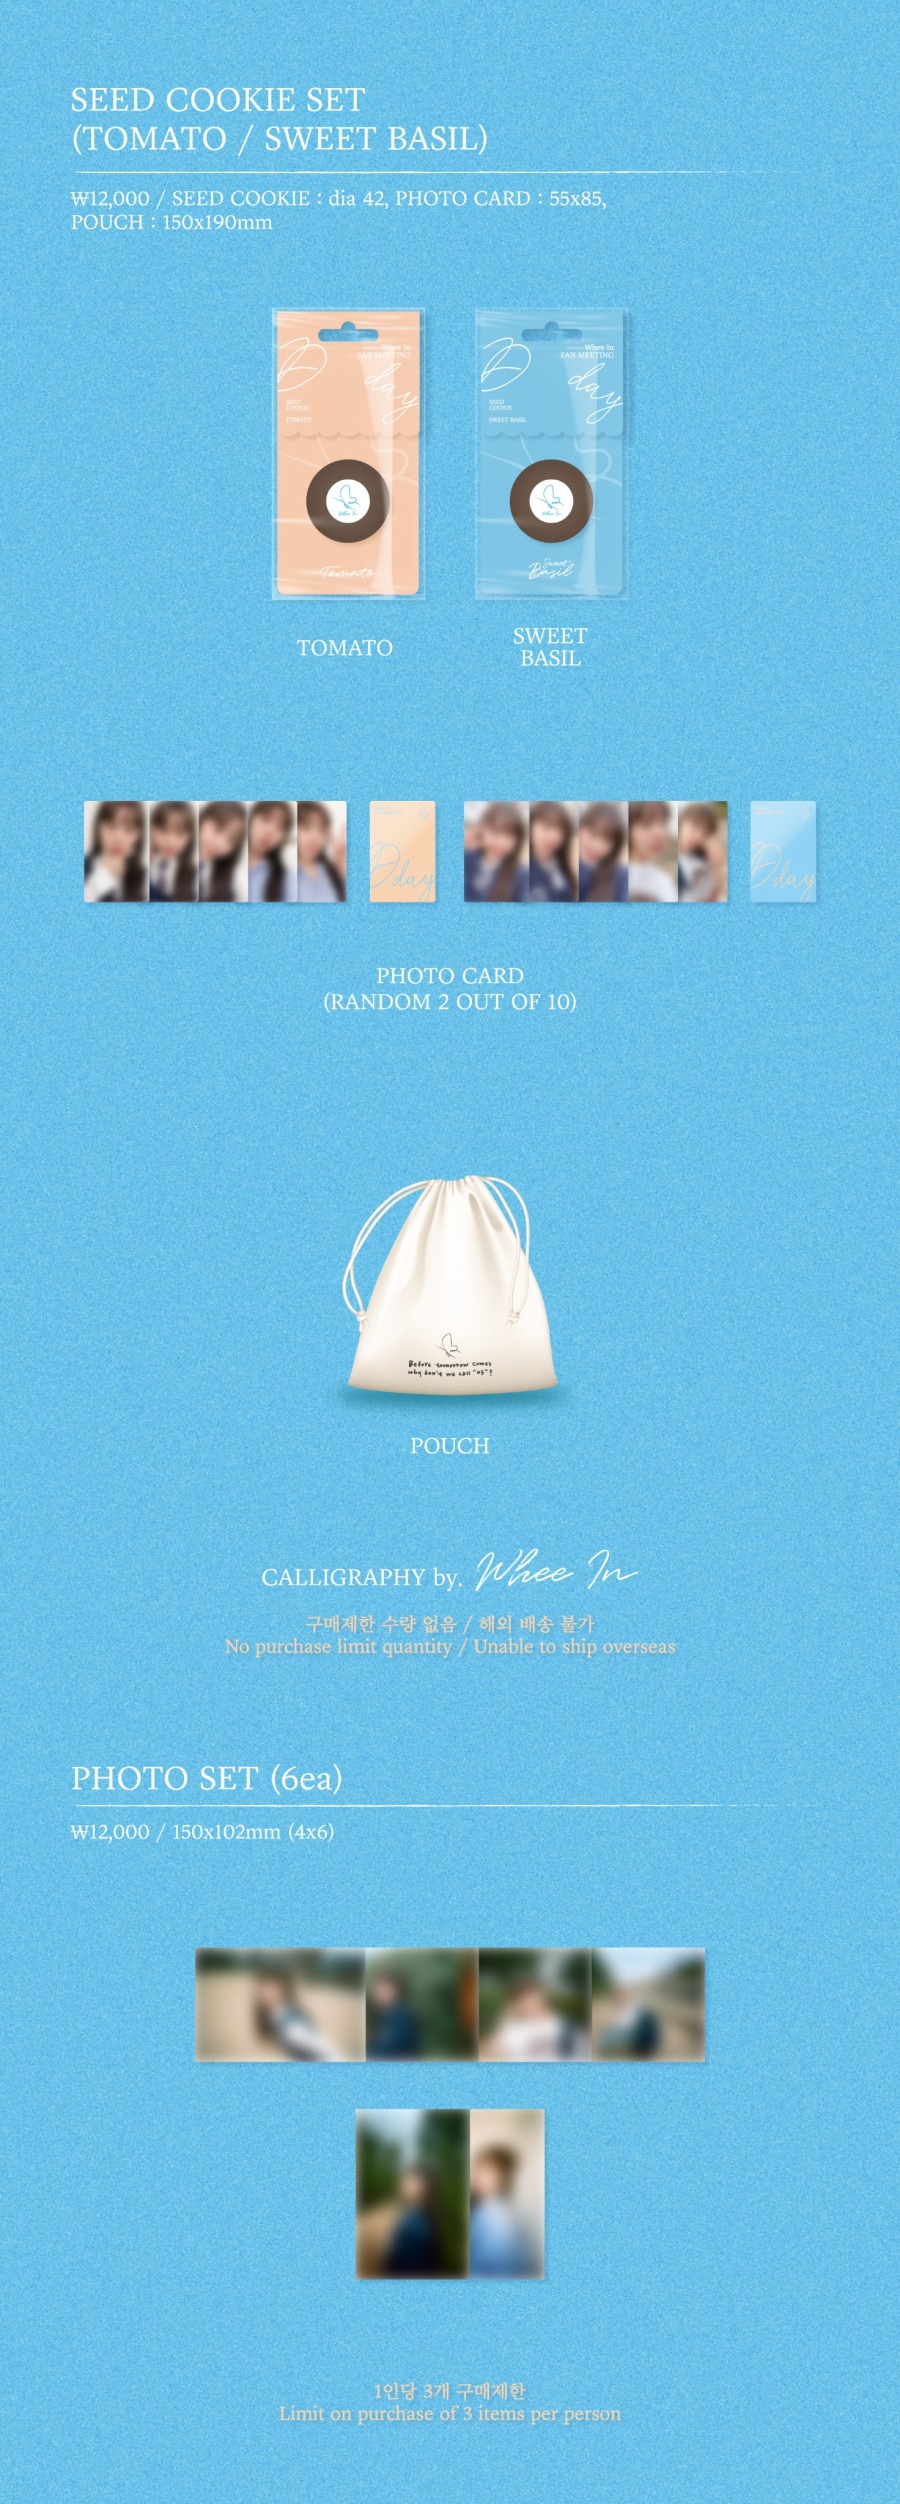 220415.2022 WHEE IN FANMEETING [D-DAY] OFFICIAL MD ONLINE SALES 3.jpg